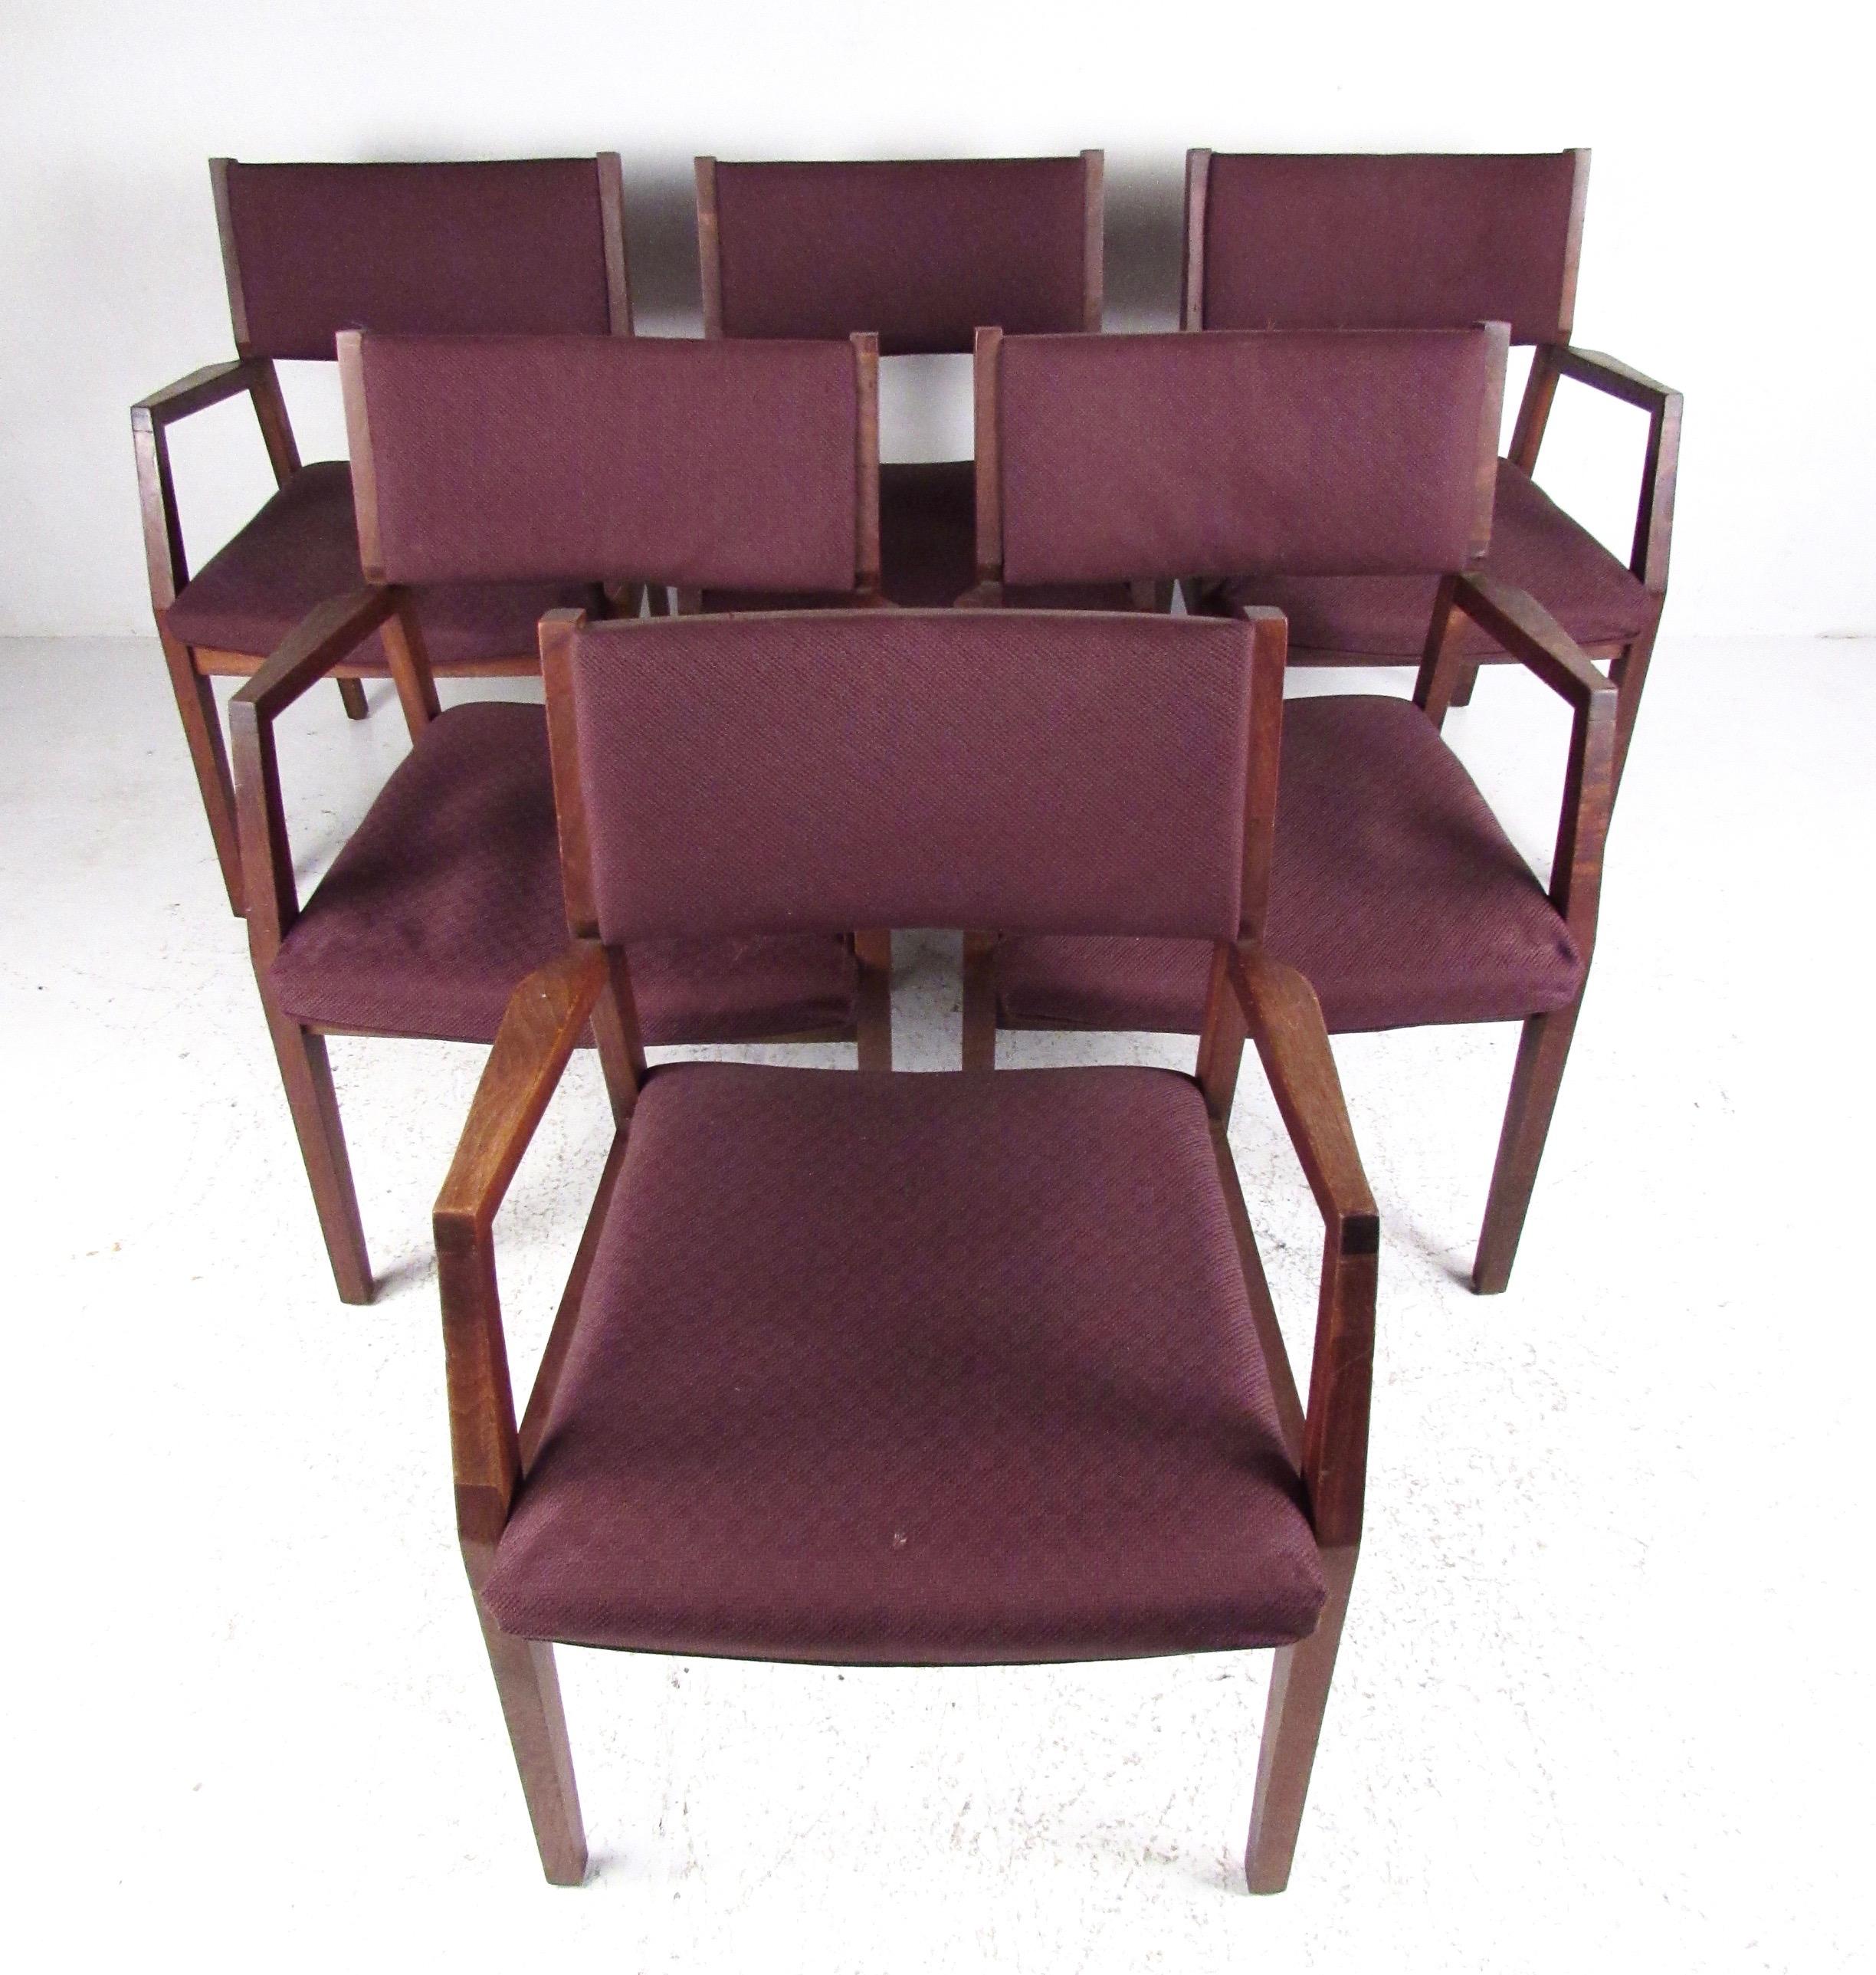 This set of stylish Mid-Century Modern armchairs feature spacious sturdy seats and hardwood frames. Upholstered seats and backs are comfortably padded while the vintage walnut finish makes a Classic vintage modern addition to home or business